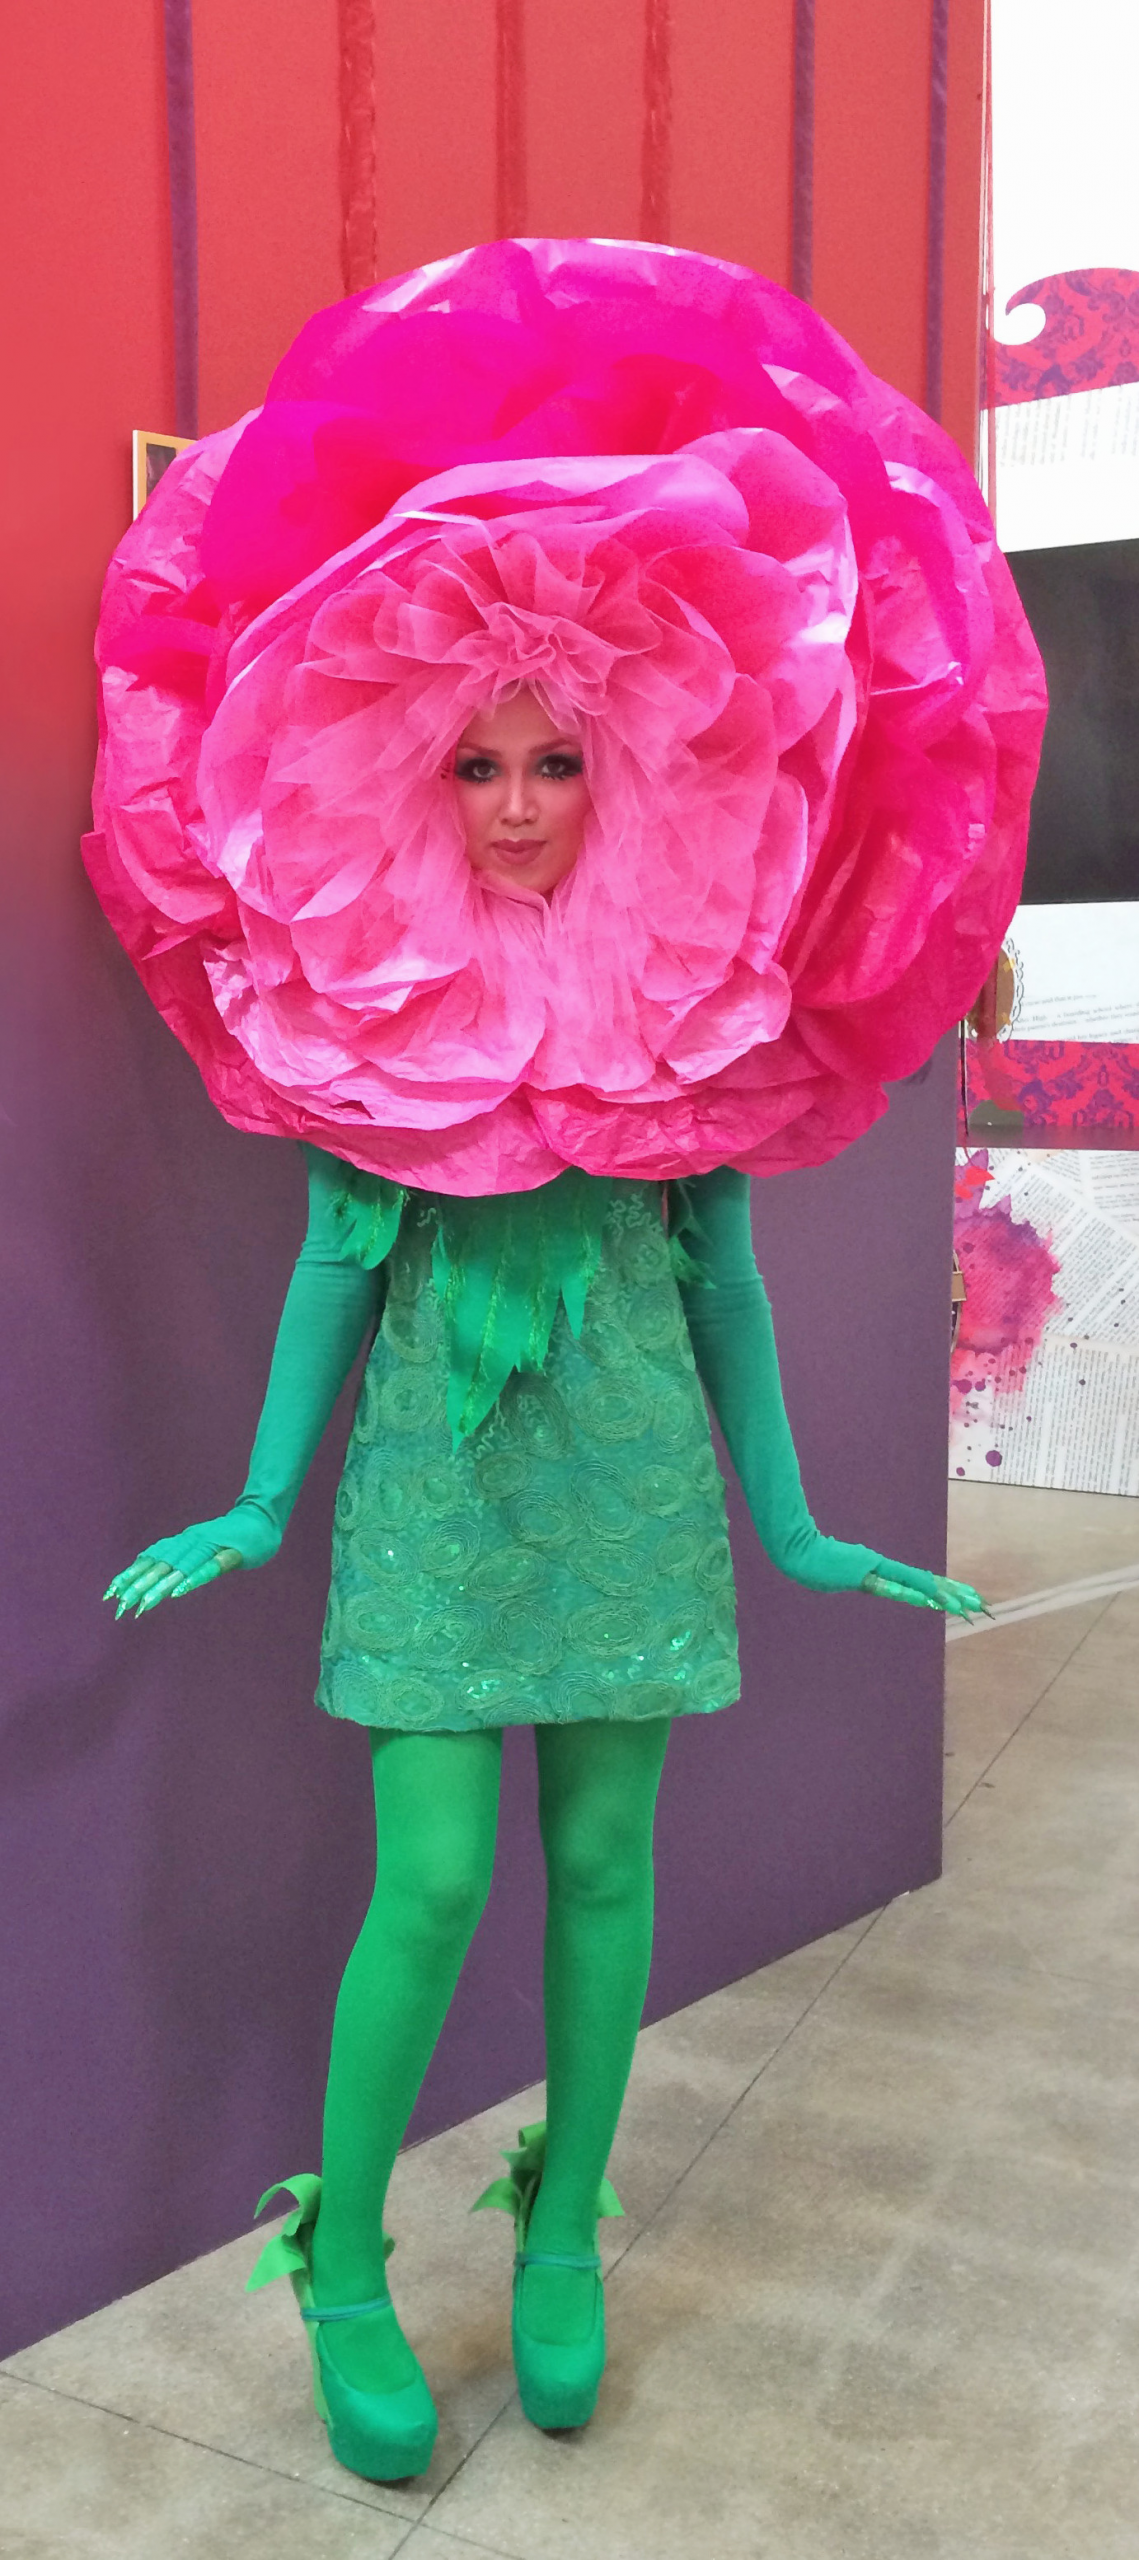 Flower Halloween Costume For Adults
 Flower Face The Beautifulcircus